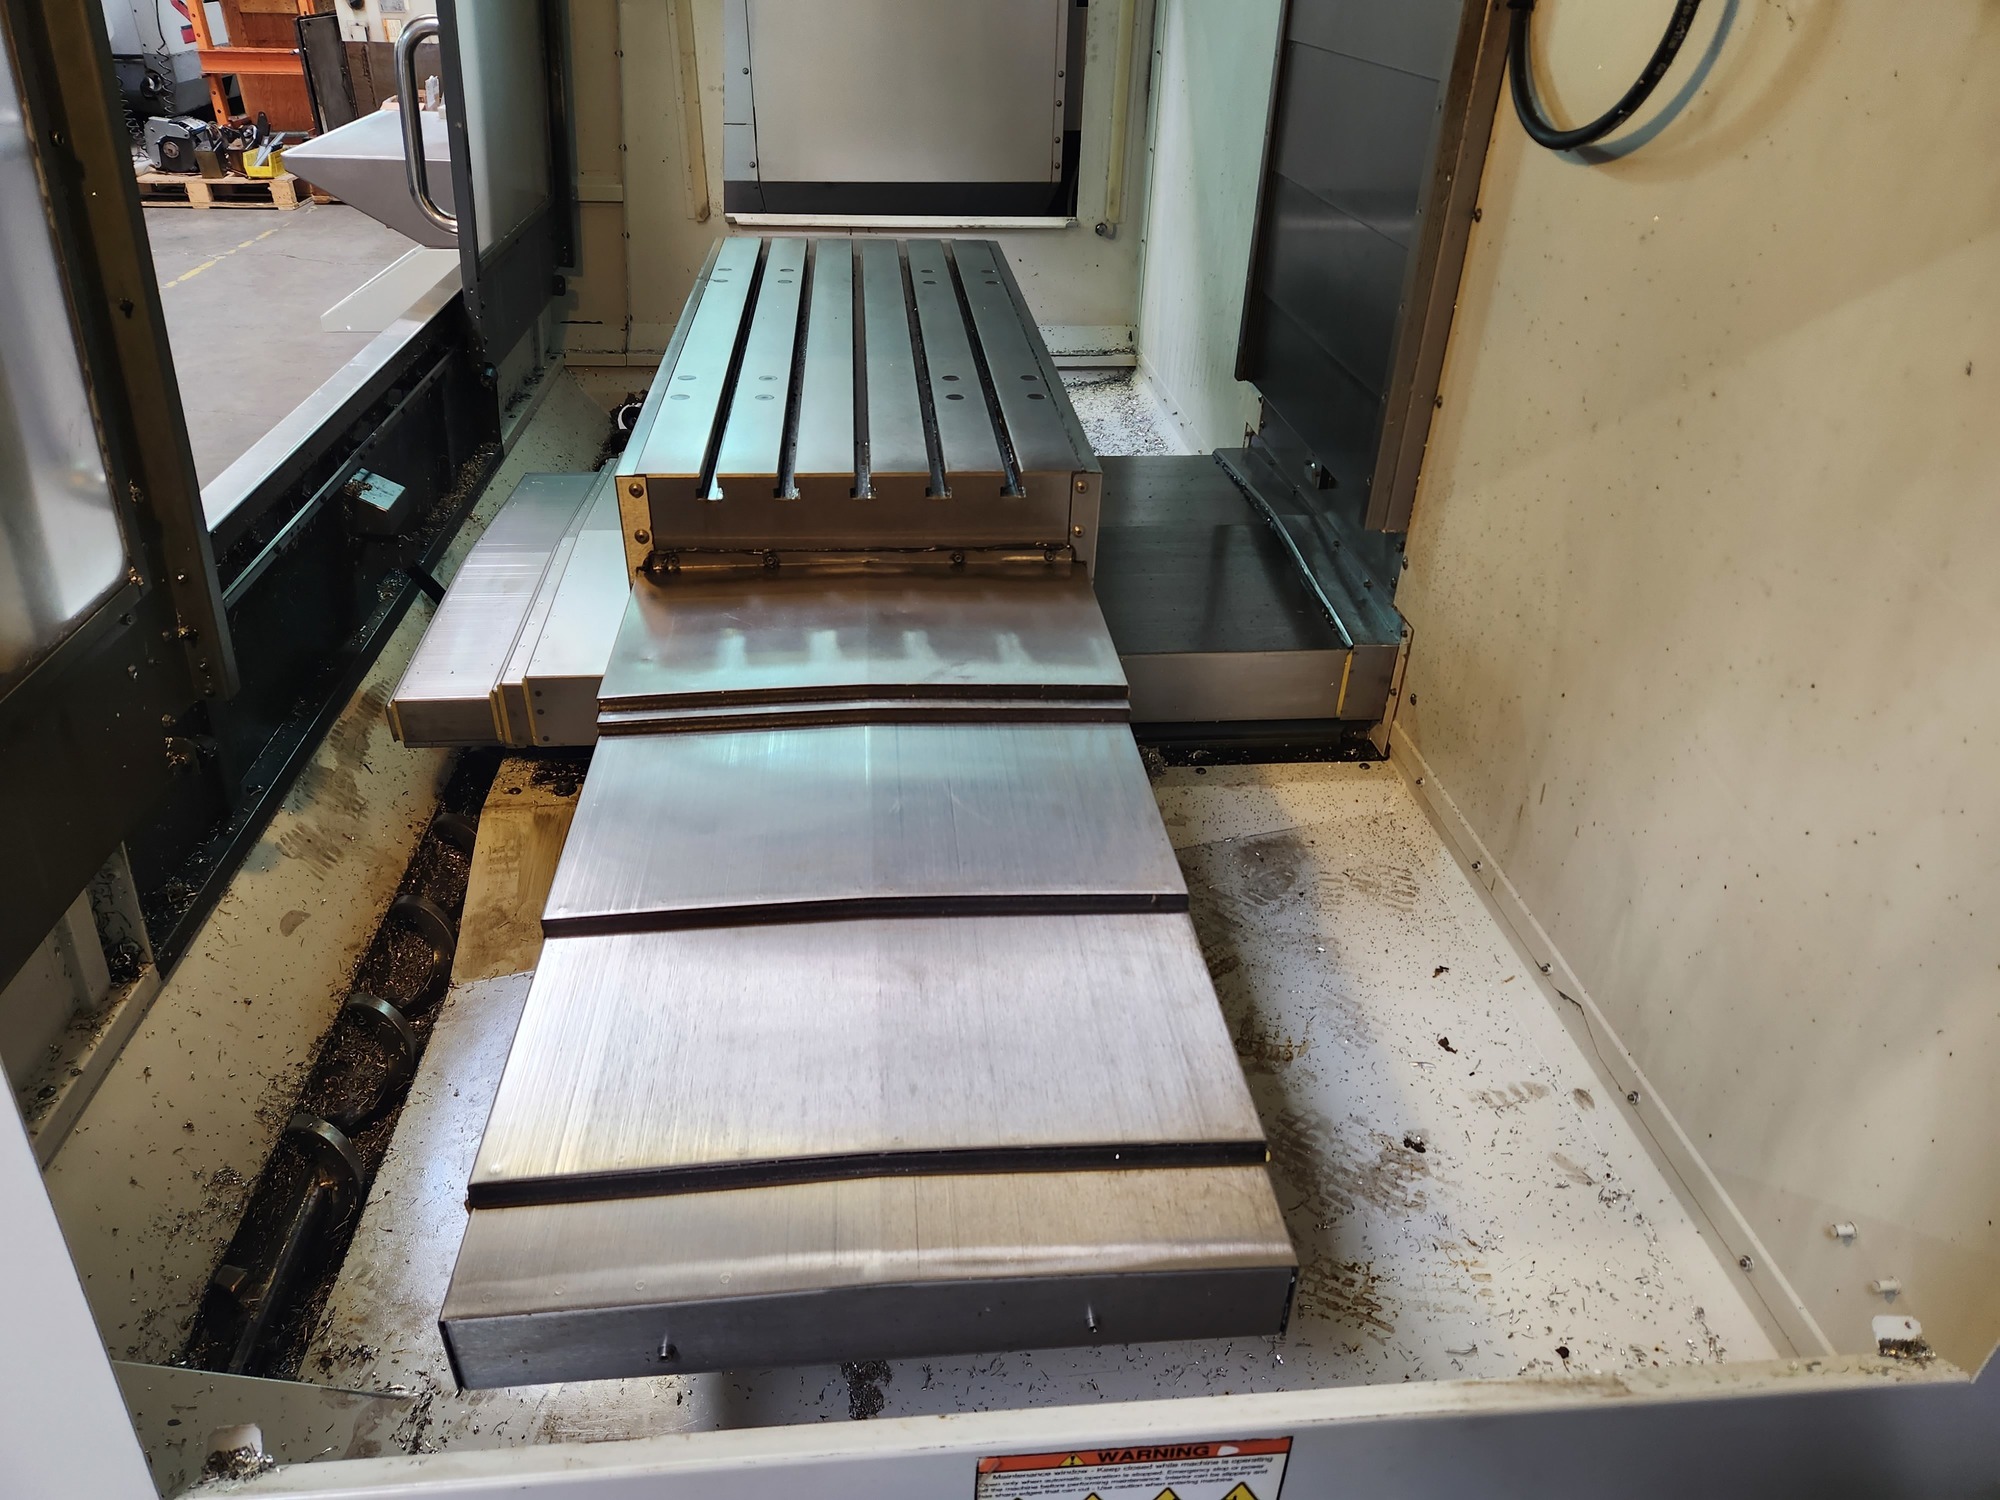 2011 HAAS VF-3SS Vertical Machining Centers | SMS Engineering